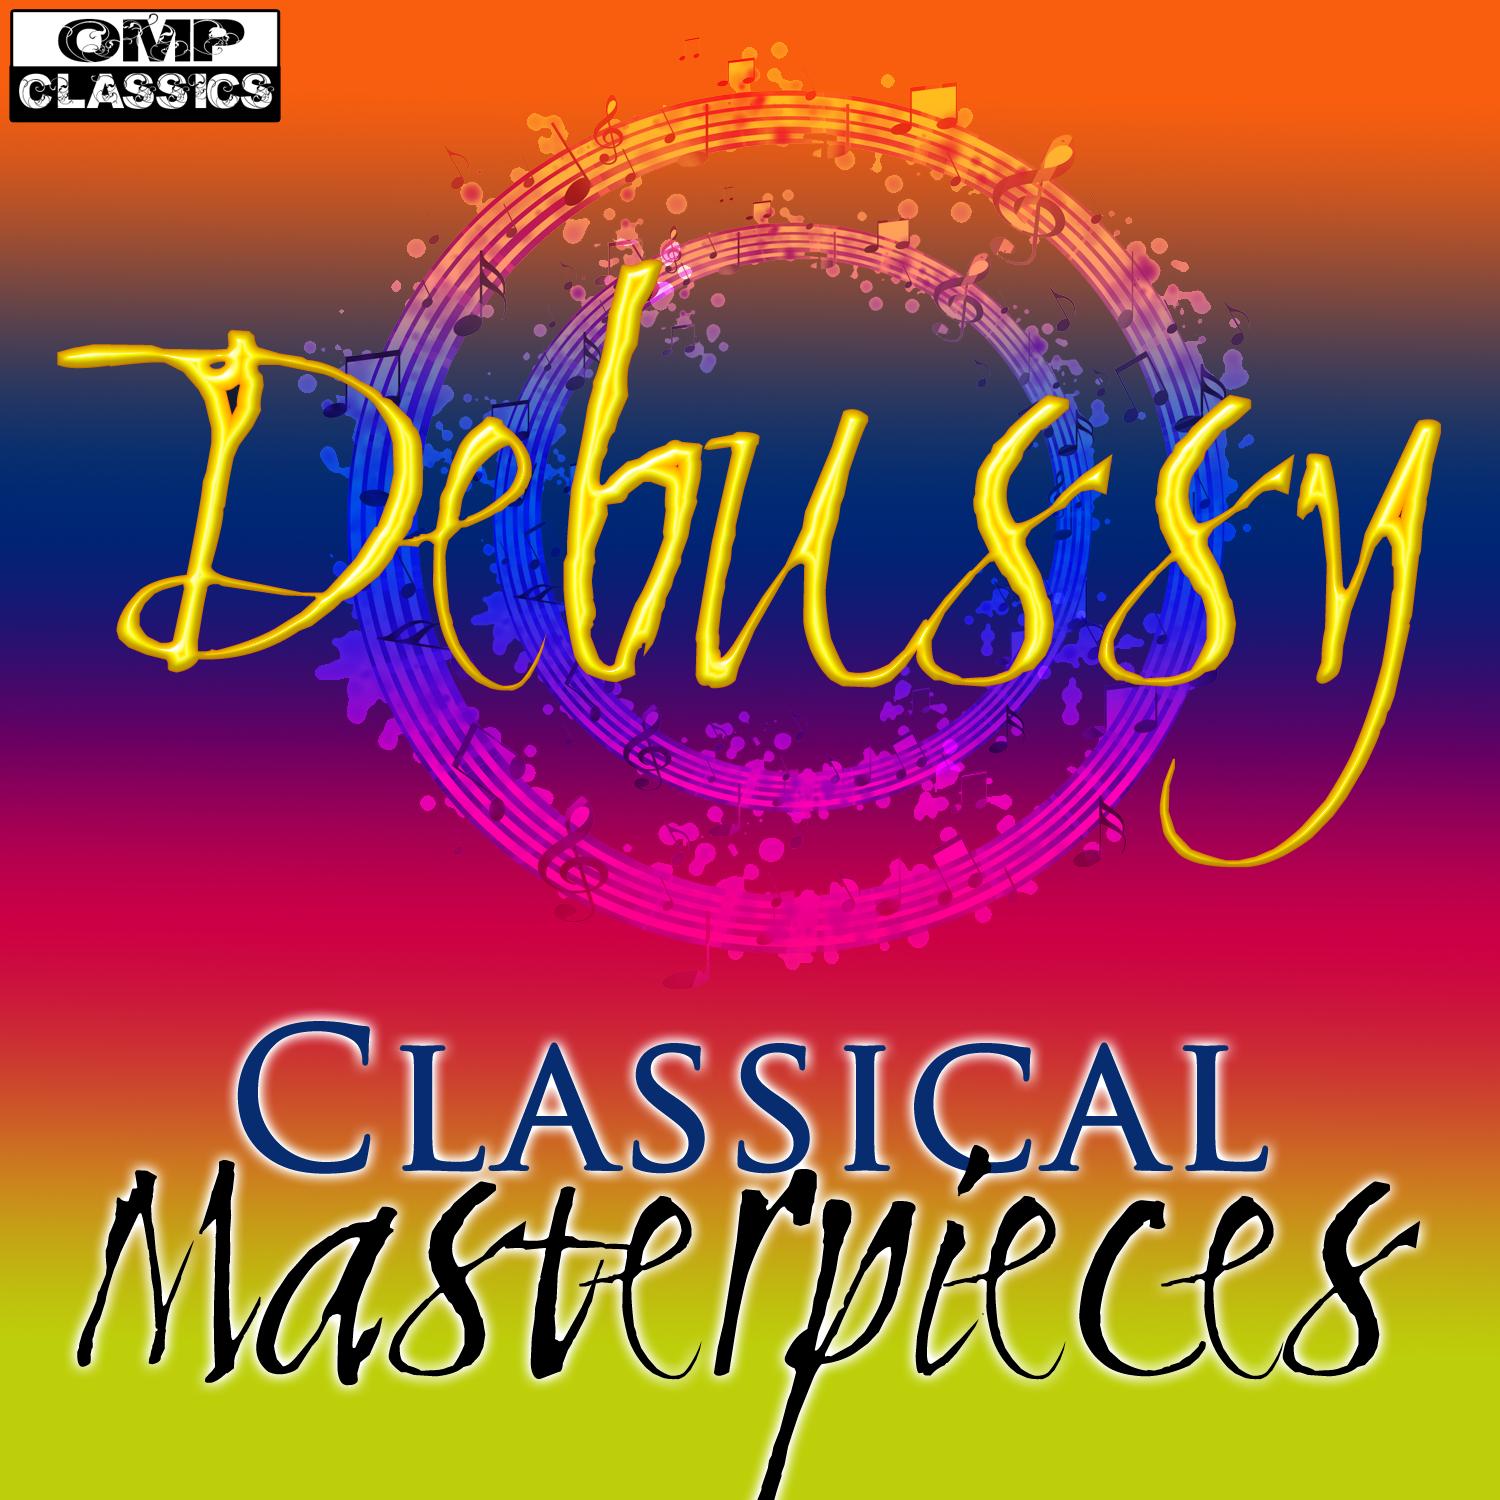 Debussy: Classical Masterpieces